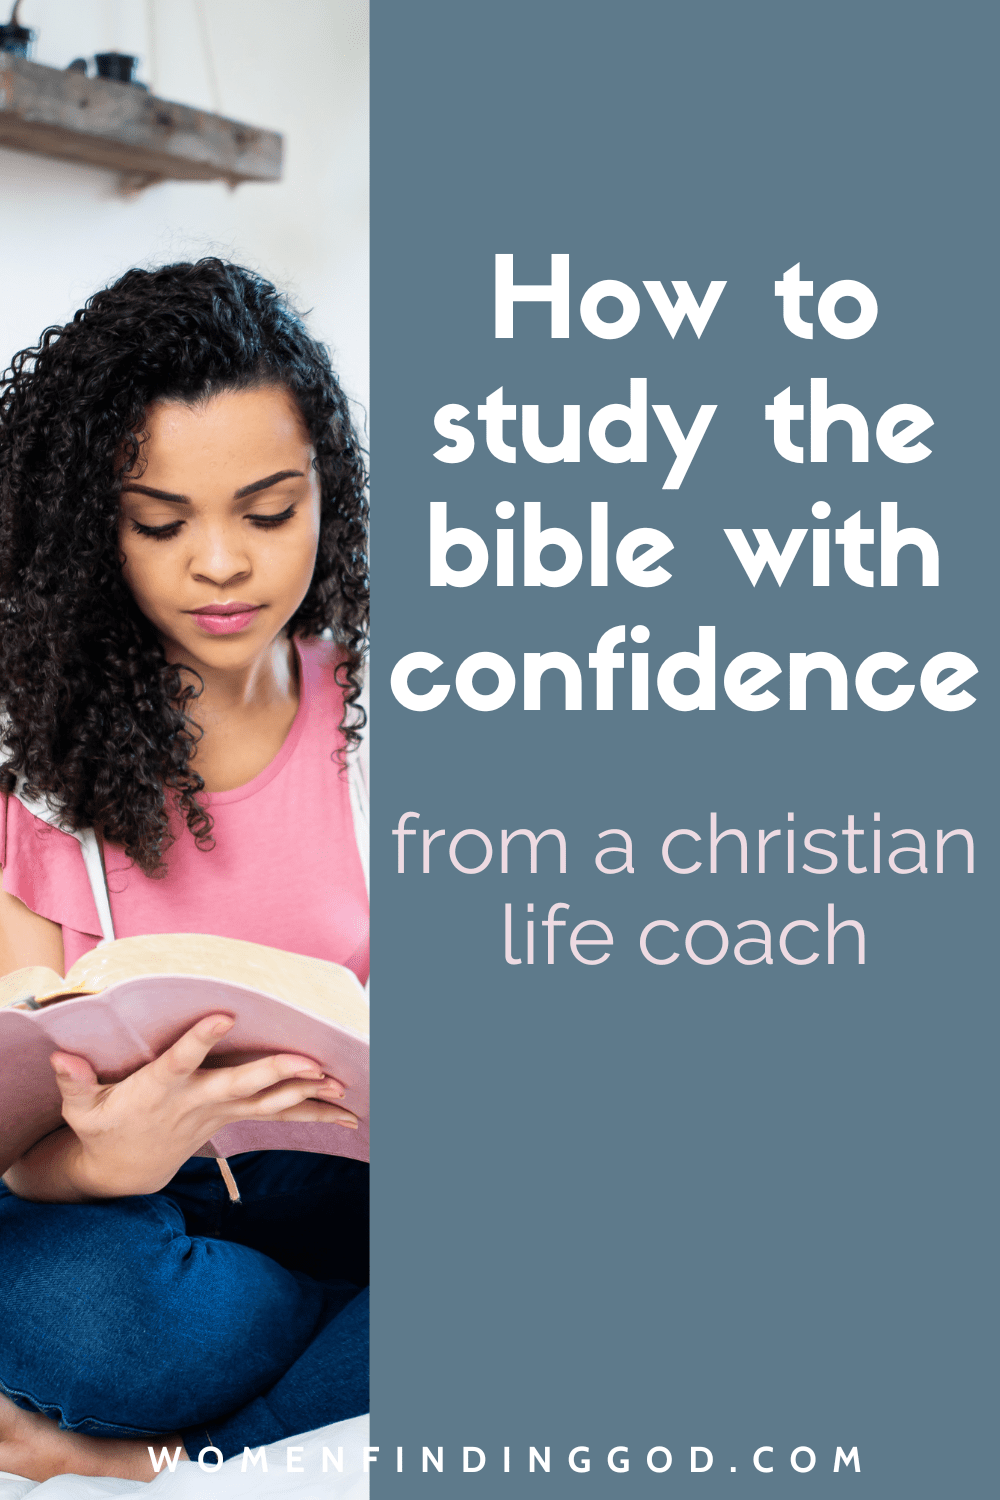 Are you ready to learn how to study the bible yourself? Learn 5 ways to study the bible without a guide or videos and how to choose a bible - so you can actually understand what you’re reading. Plus, tips about how to decide what to study in your bible, the best bible study tools for beginners, and what do you when you fail behind in your bible study. Everything you need to know when you are learning how to study the bible as a beginner!